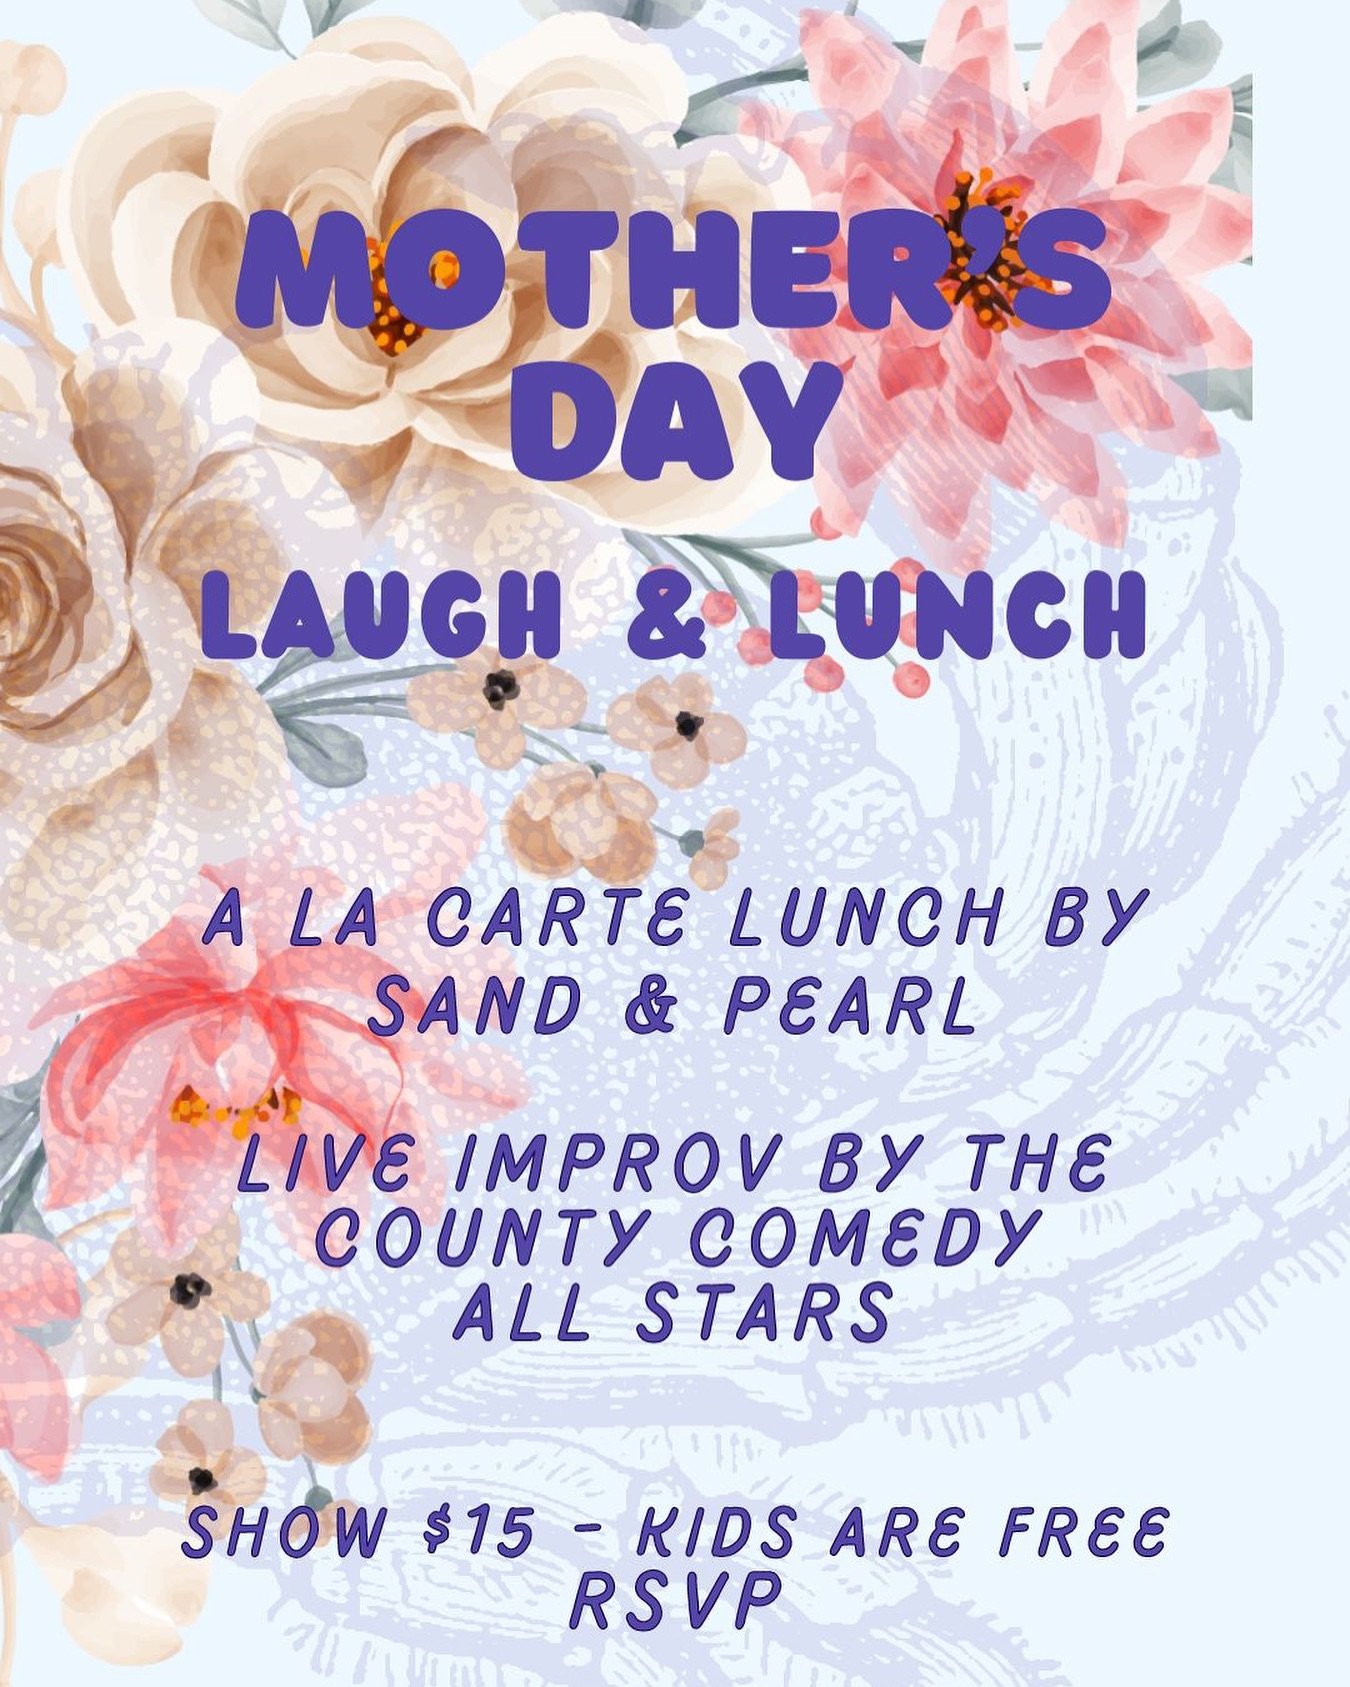 Come laugh with your mom on Mother&rsquo;s Day! 

We are super excited for our friends, The County Comedy All Stars to entertain us at lunch with a 45 minute Improv Show! 

Reservations are available through the link in our bio and on our website. 

